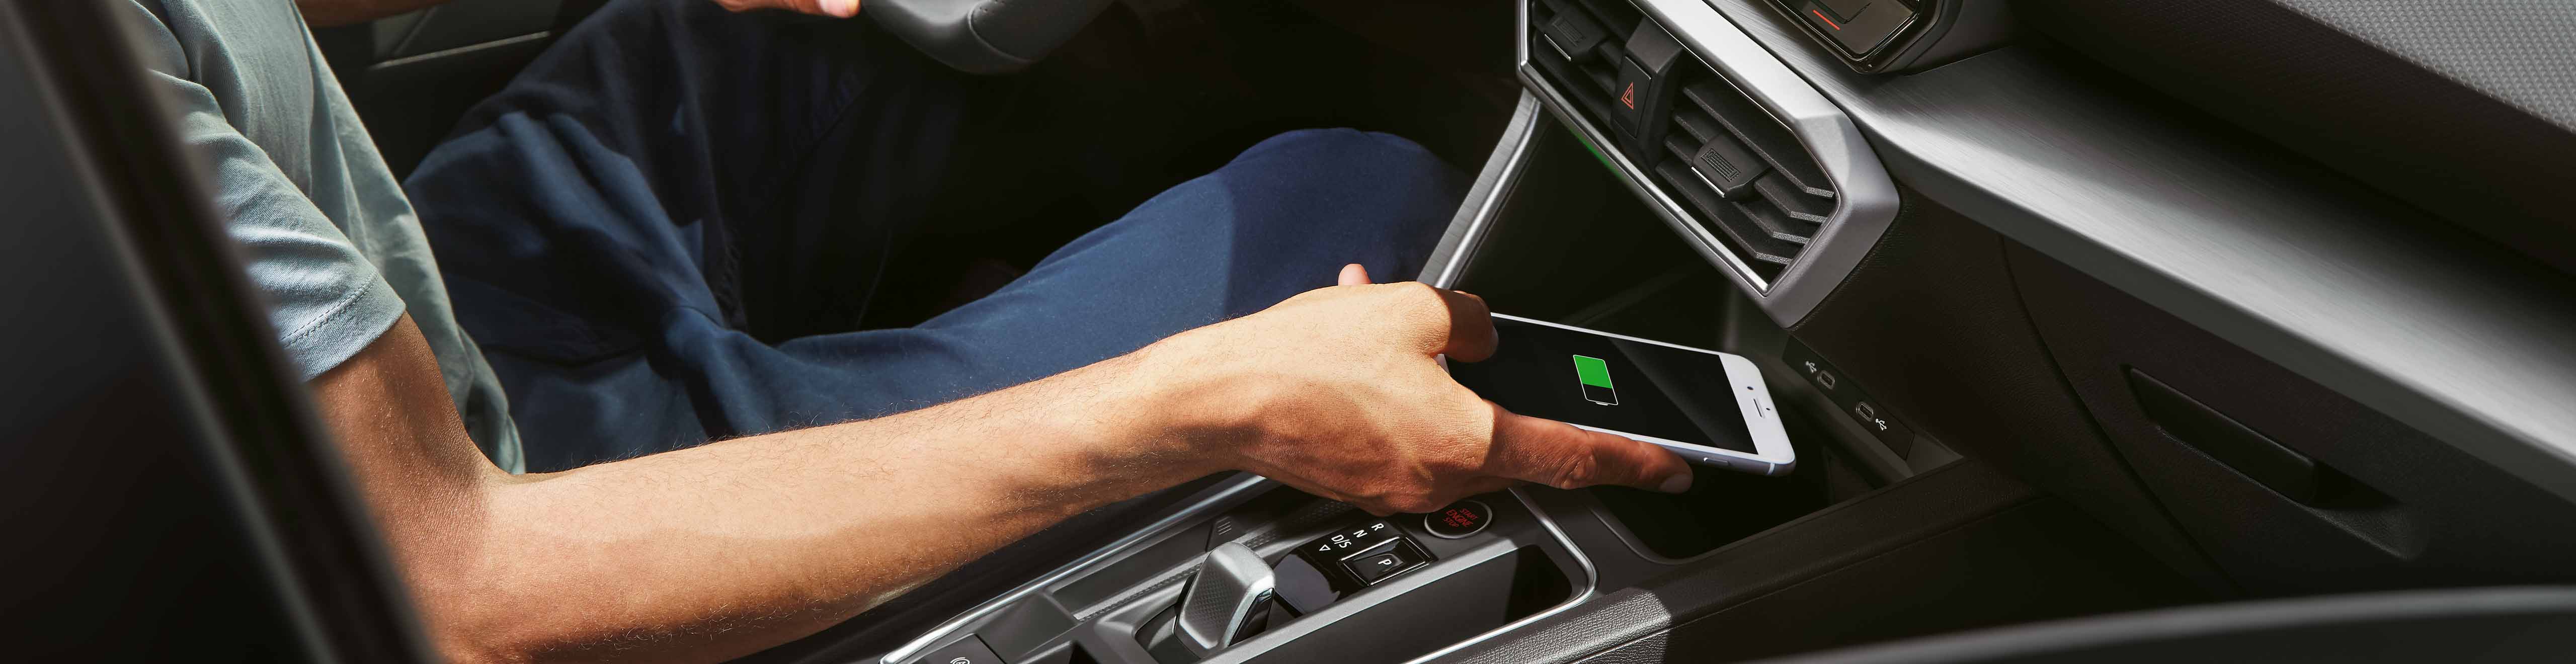 man-inside-seat-leon-conecting-the-phone 